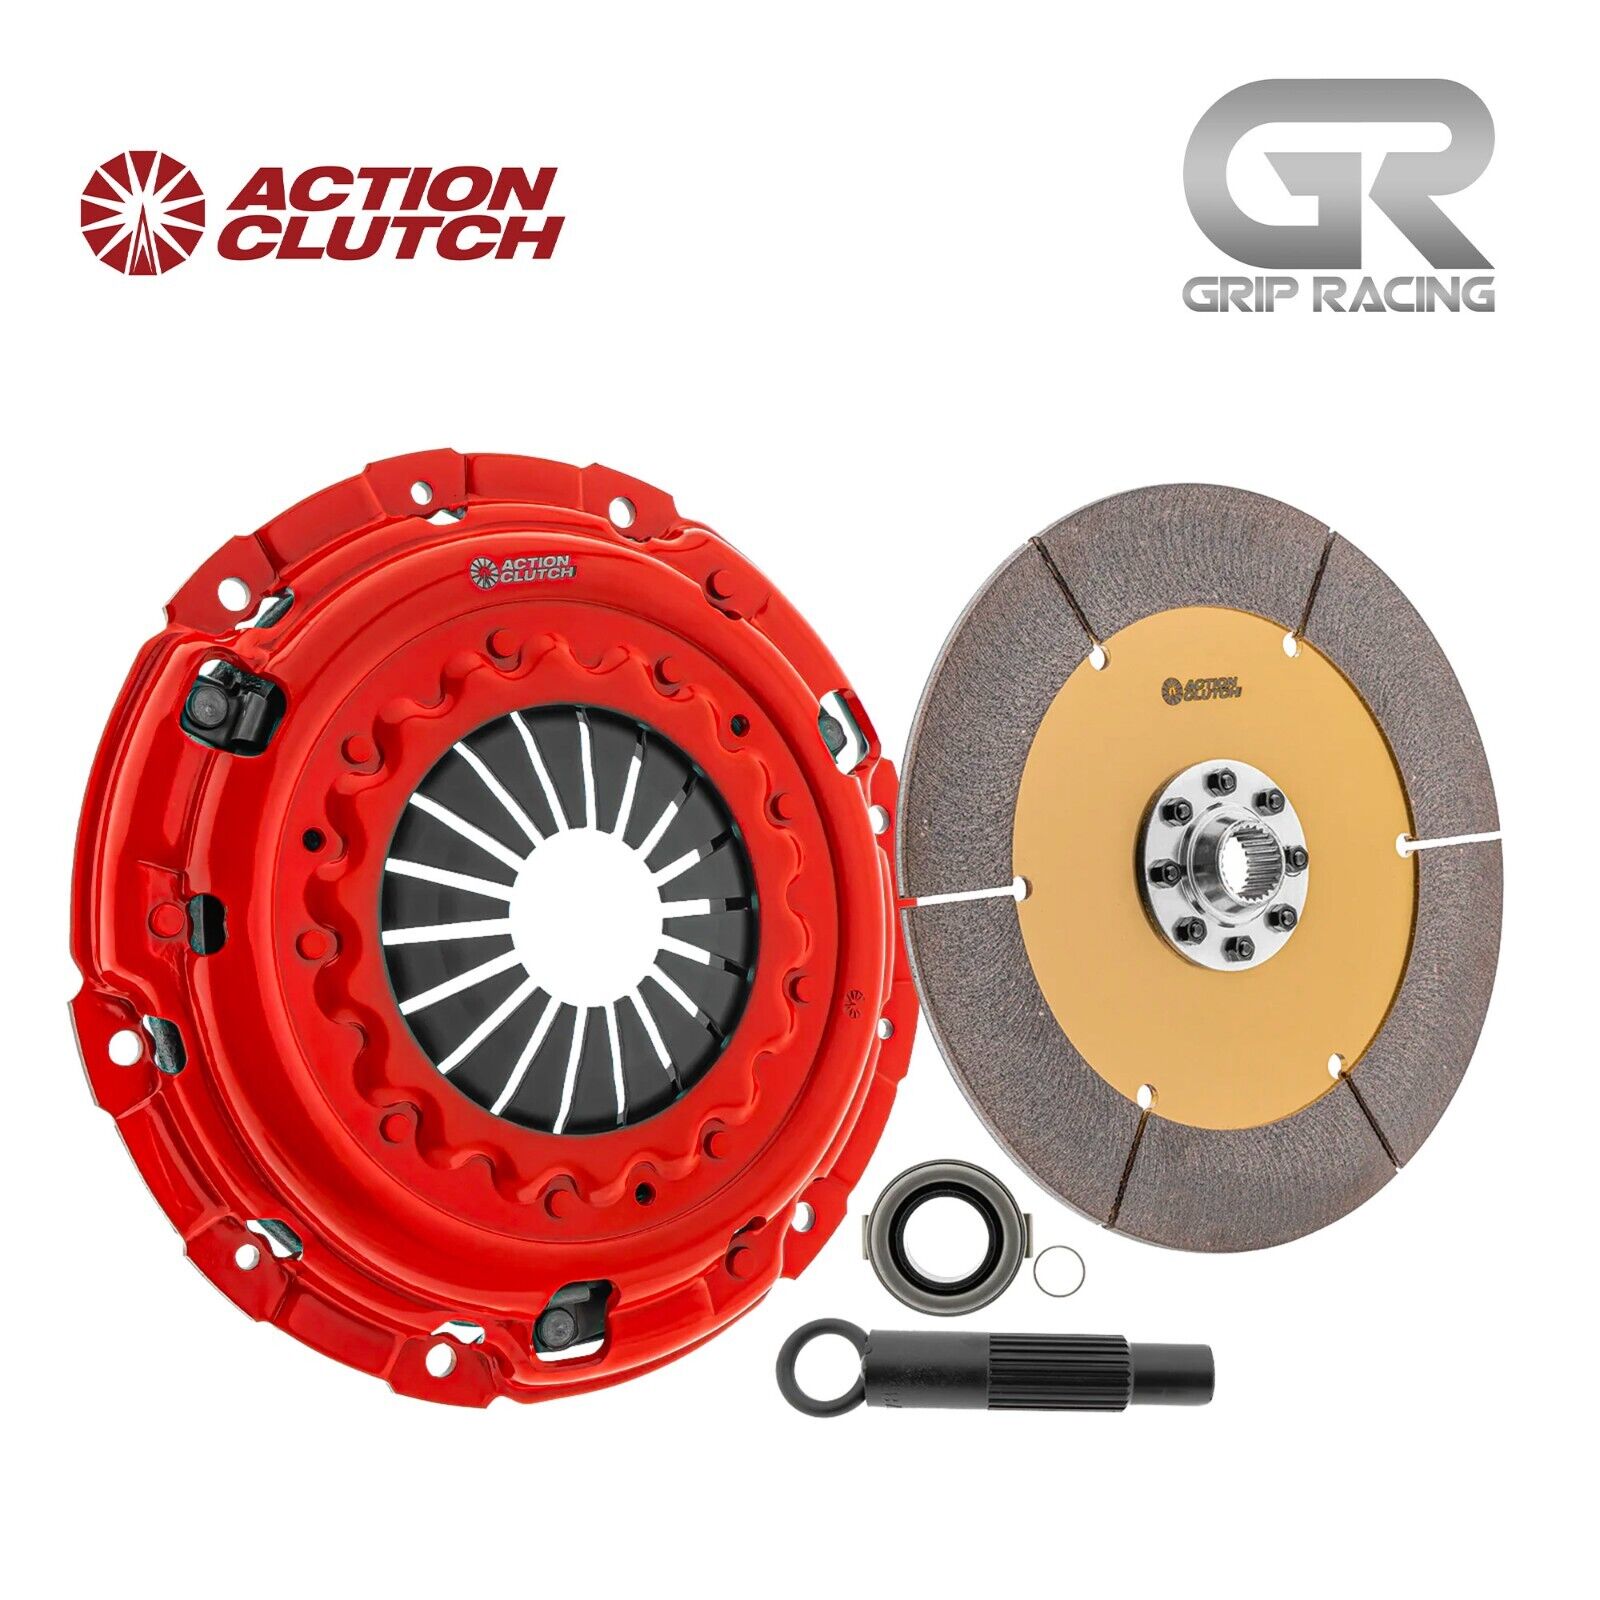 AC Ironman Unsprung Clutch Kit For Mitsubishi Eclipse 90-94 2.0 (4G63) Non-Turbo